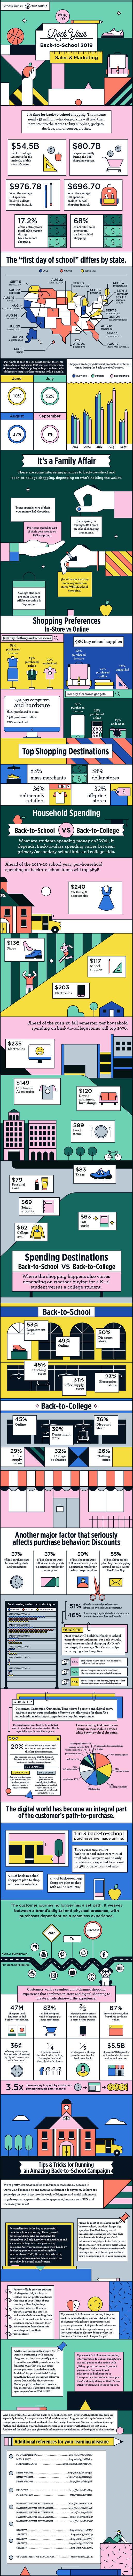 back-to-school, A Visual Guide to Social Media Marketing During the Back-to-School Season